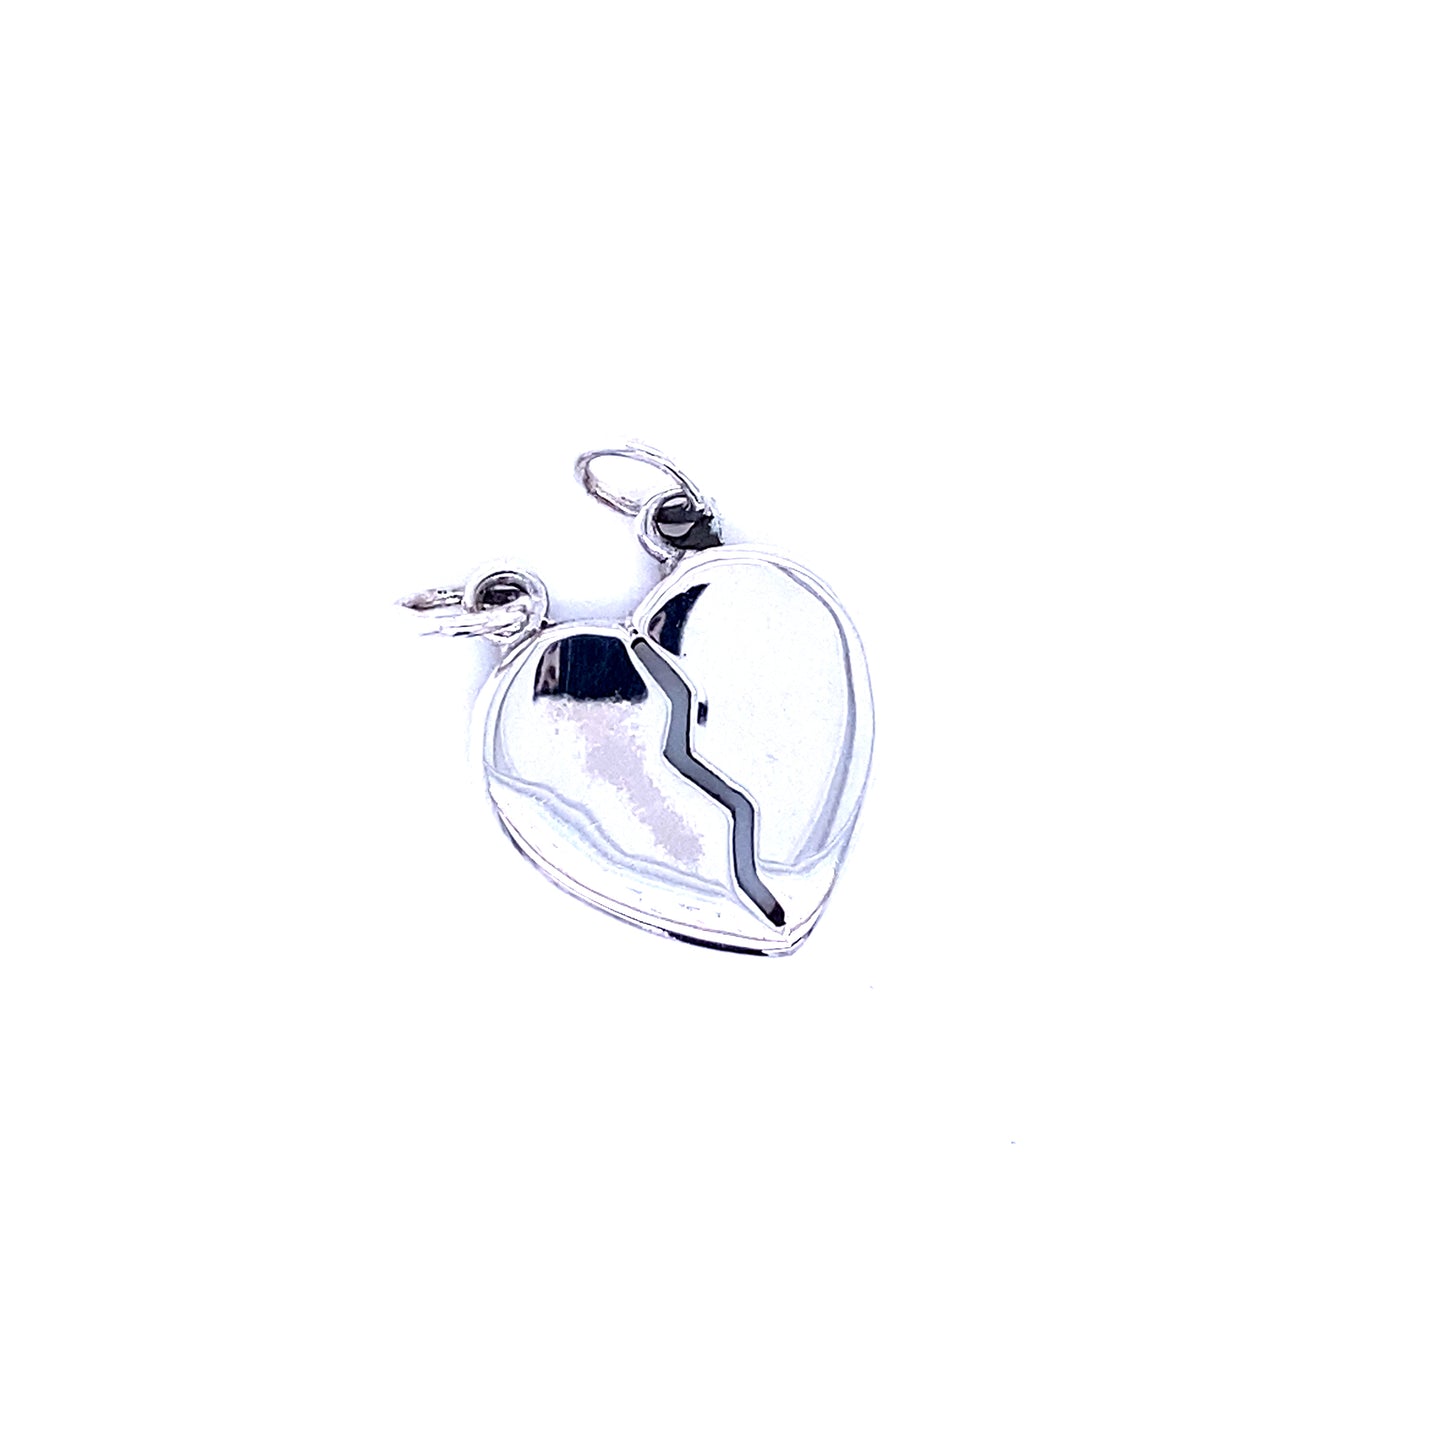 A customizable Plain Heart Break Apart Charm in .925 sterling silver, placed on a white background by Super Silver.